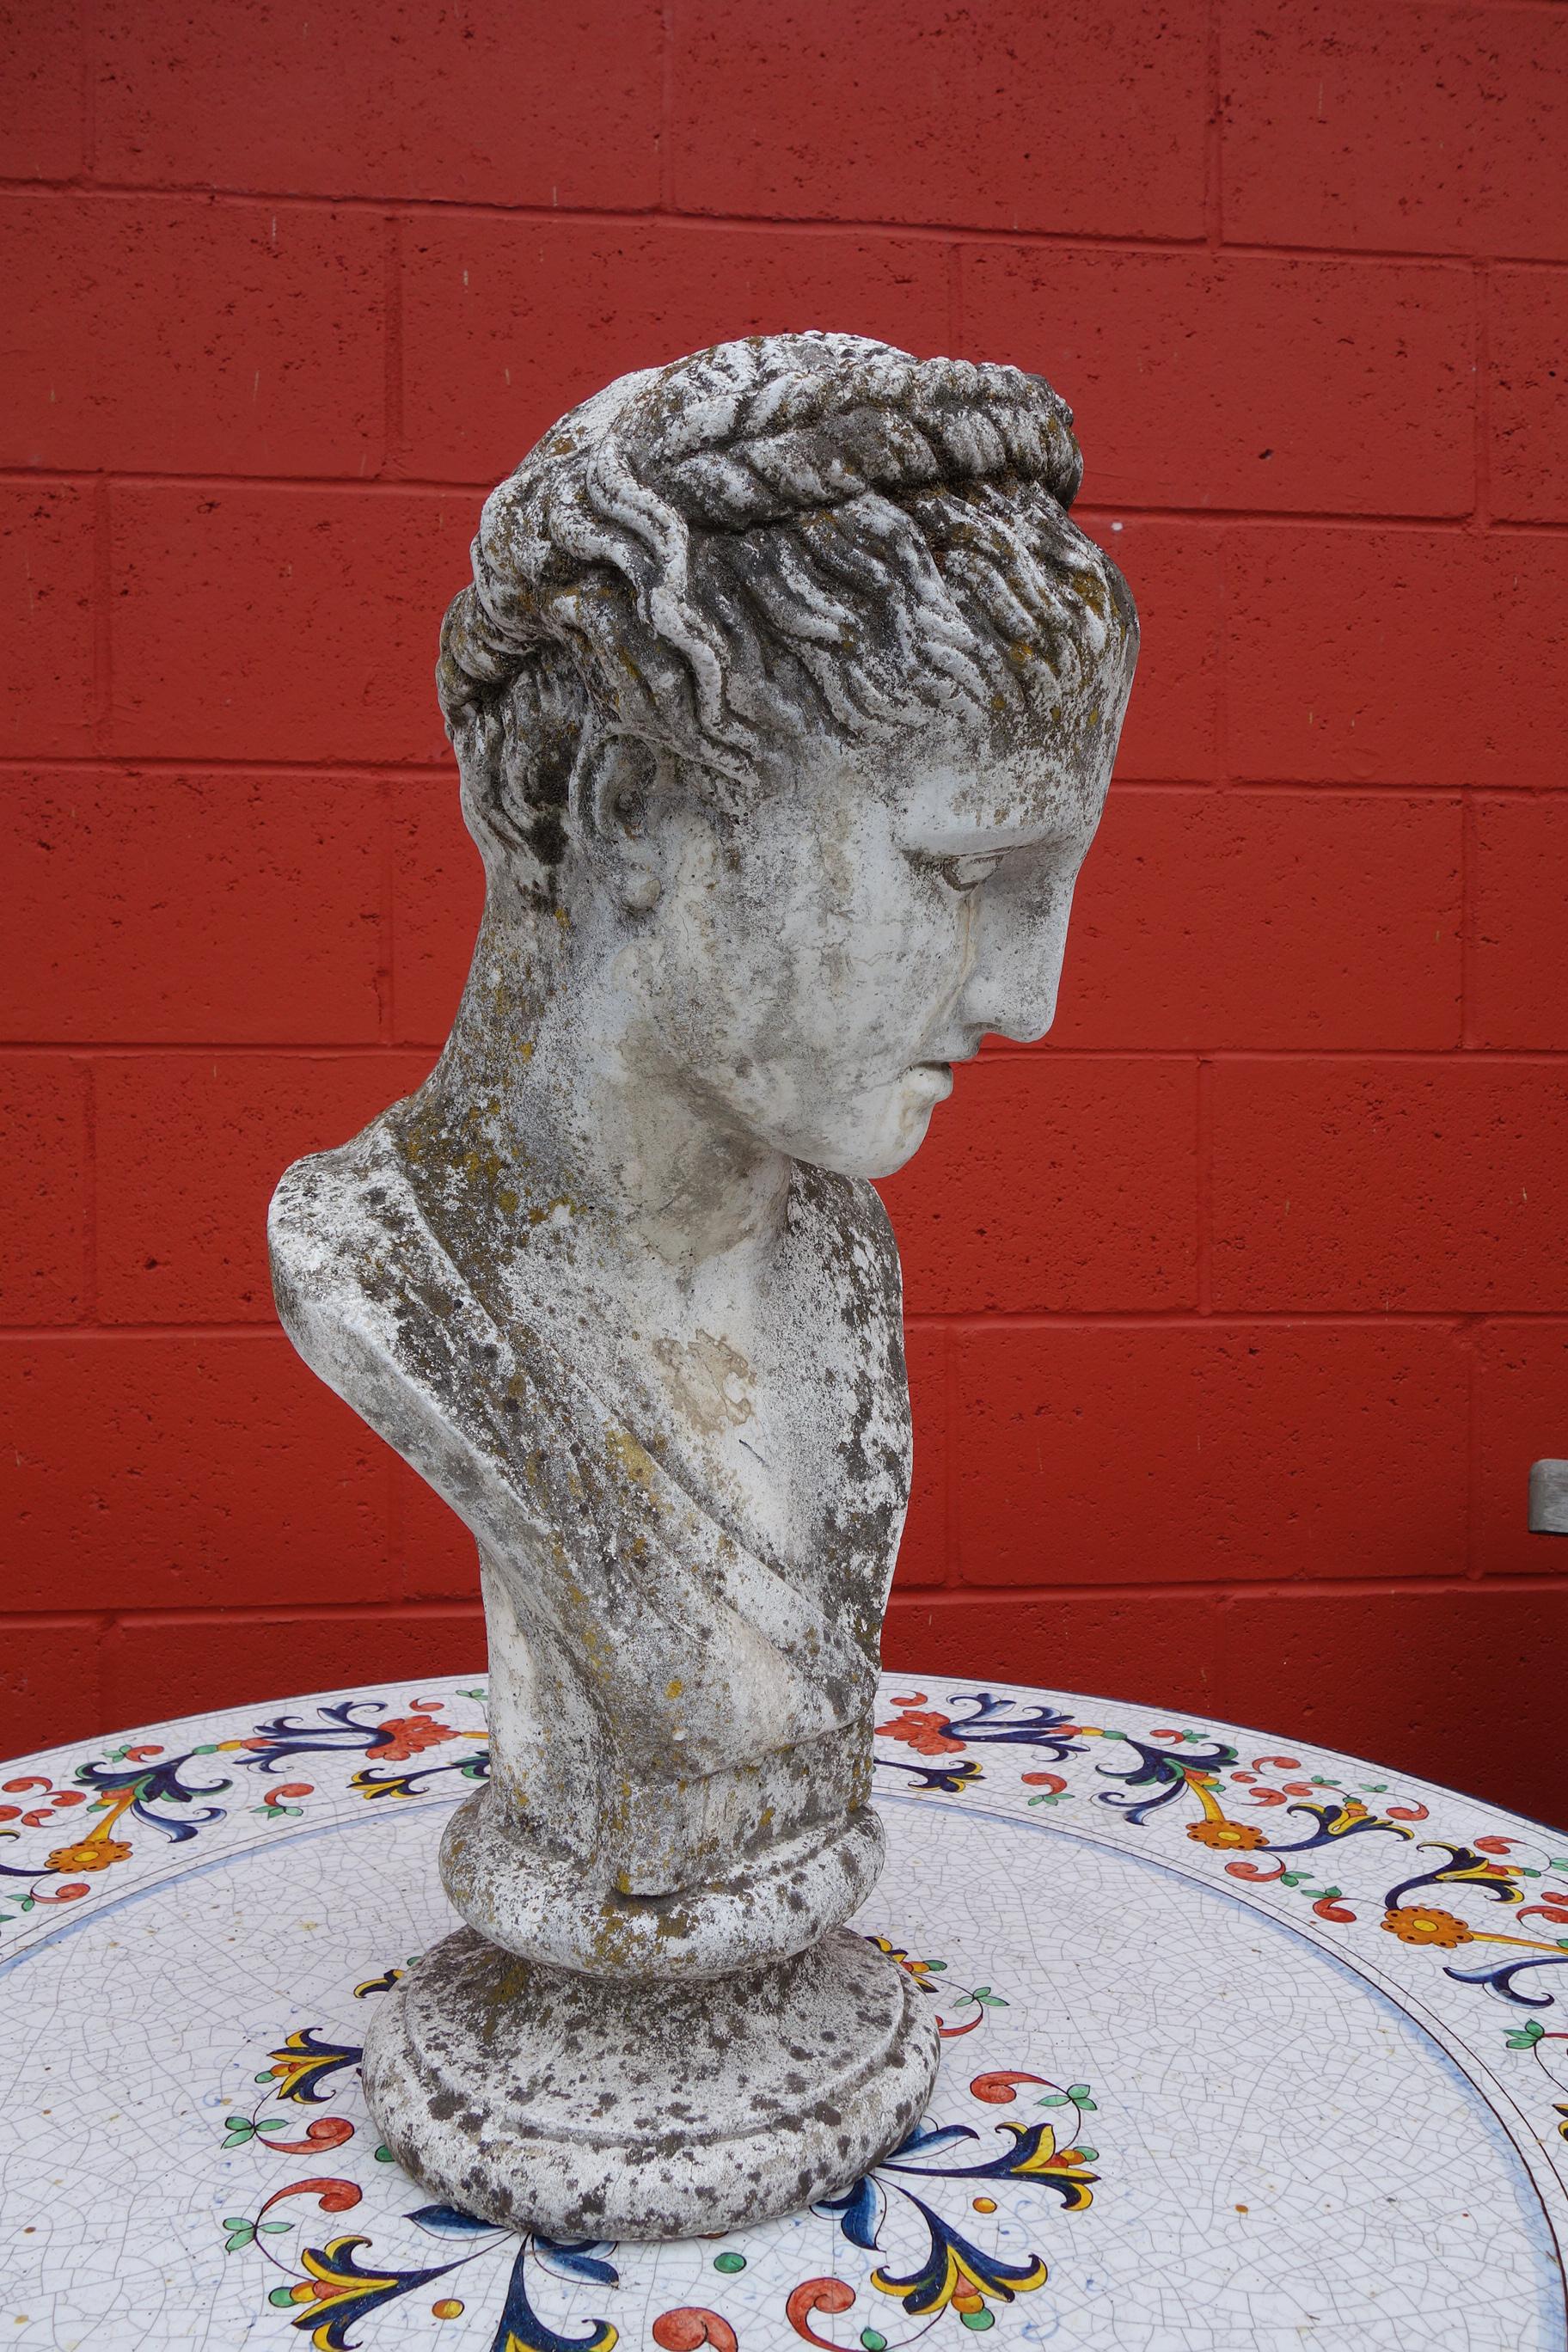 Cast 19th Century Italian Renaissance Style Hermes Bust in Grisaglia from Lake Como